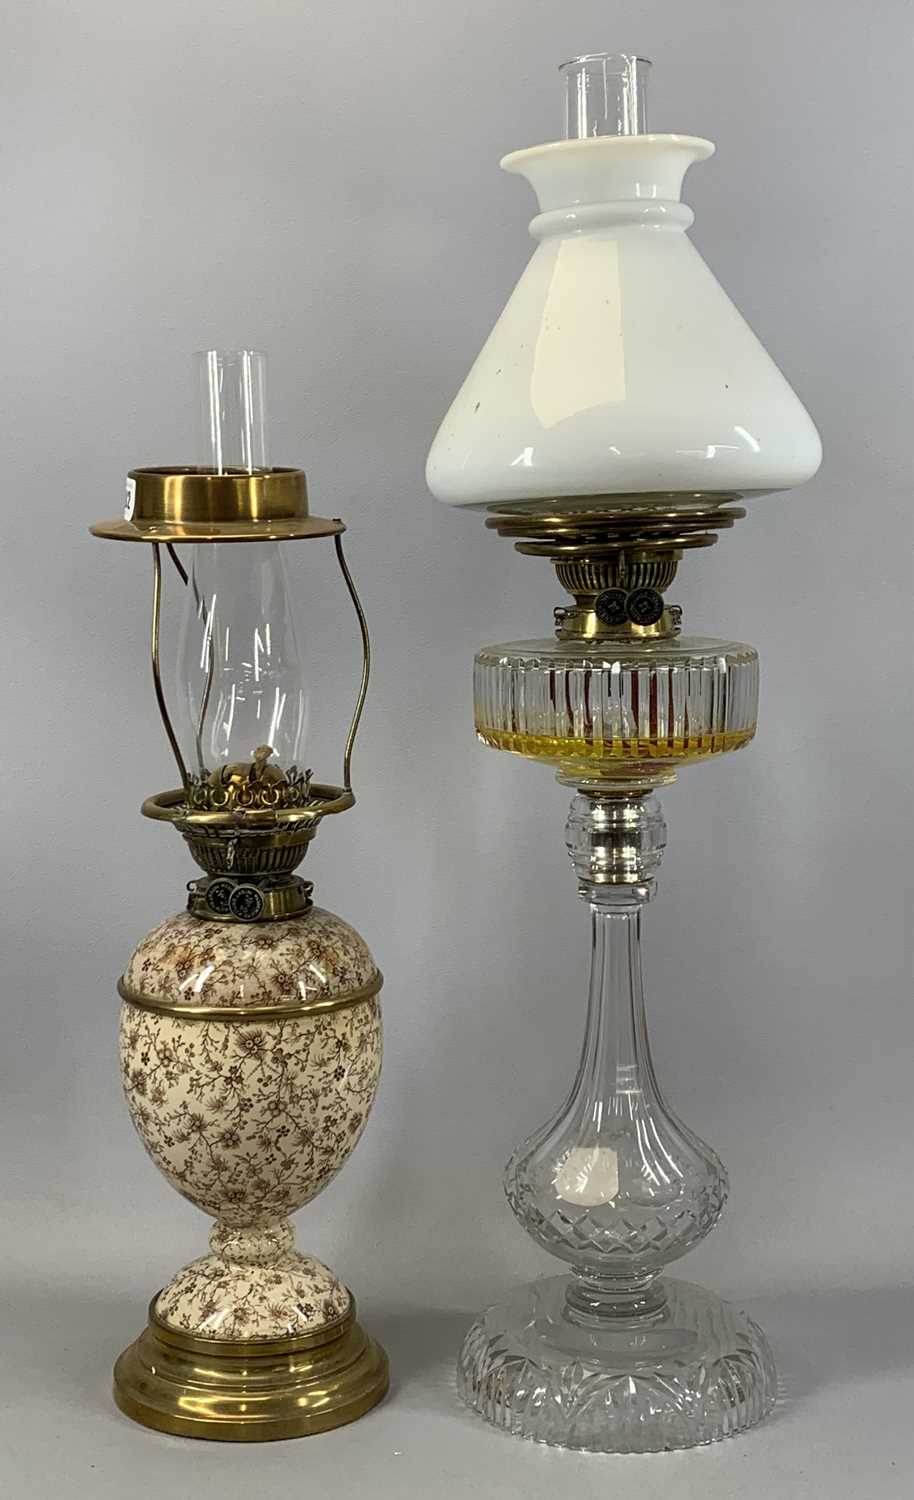 VICTORIAN BRASS & CERAMIC OIL LAMP with twin duplex burners, 33cms (h) excluding fitting, and good